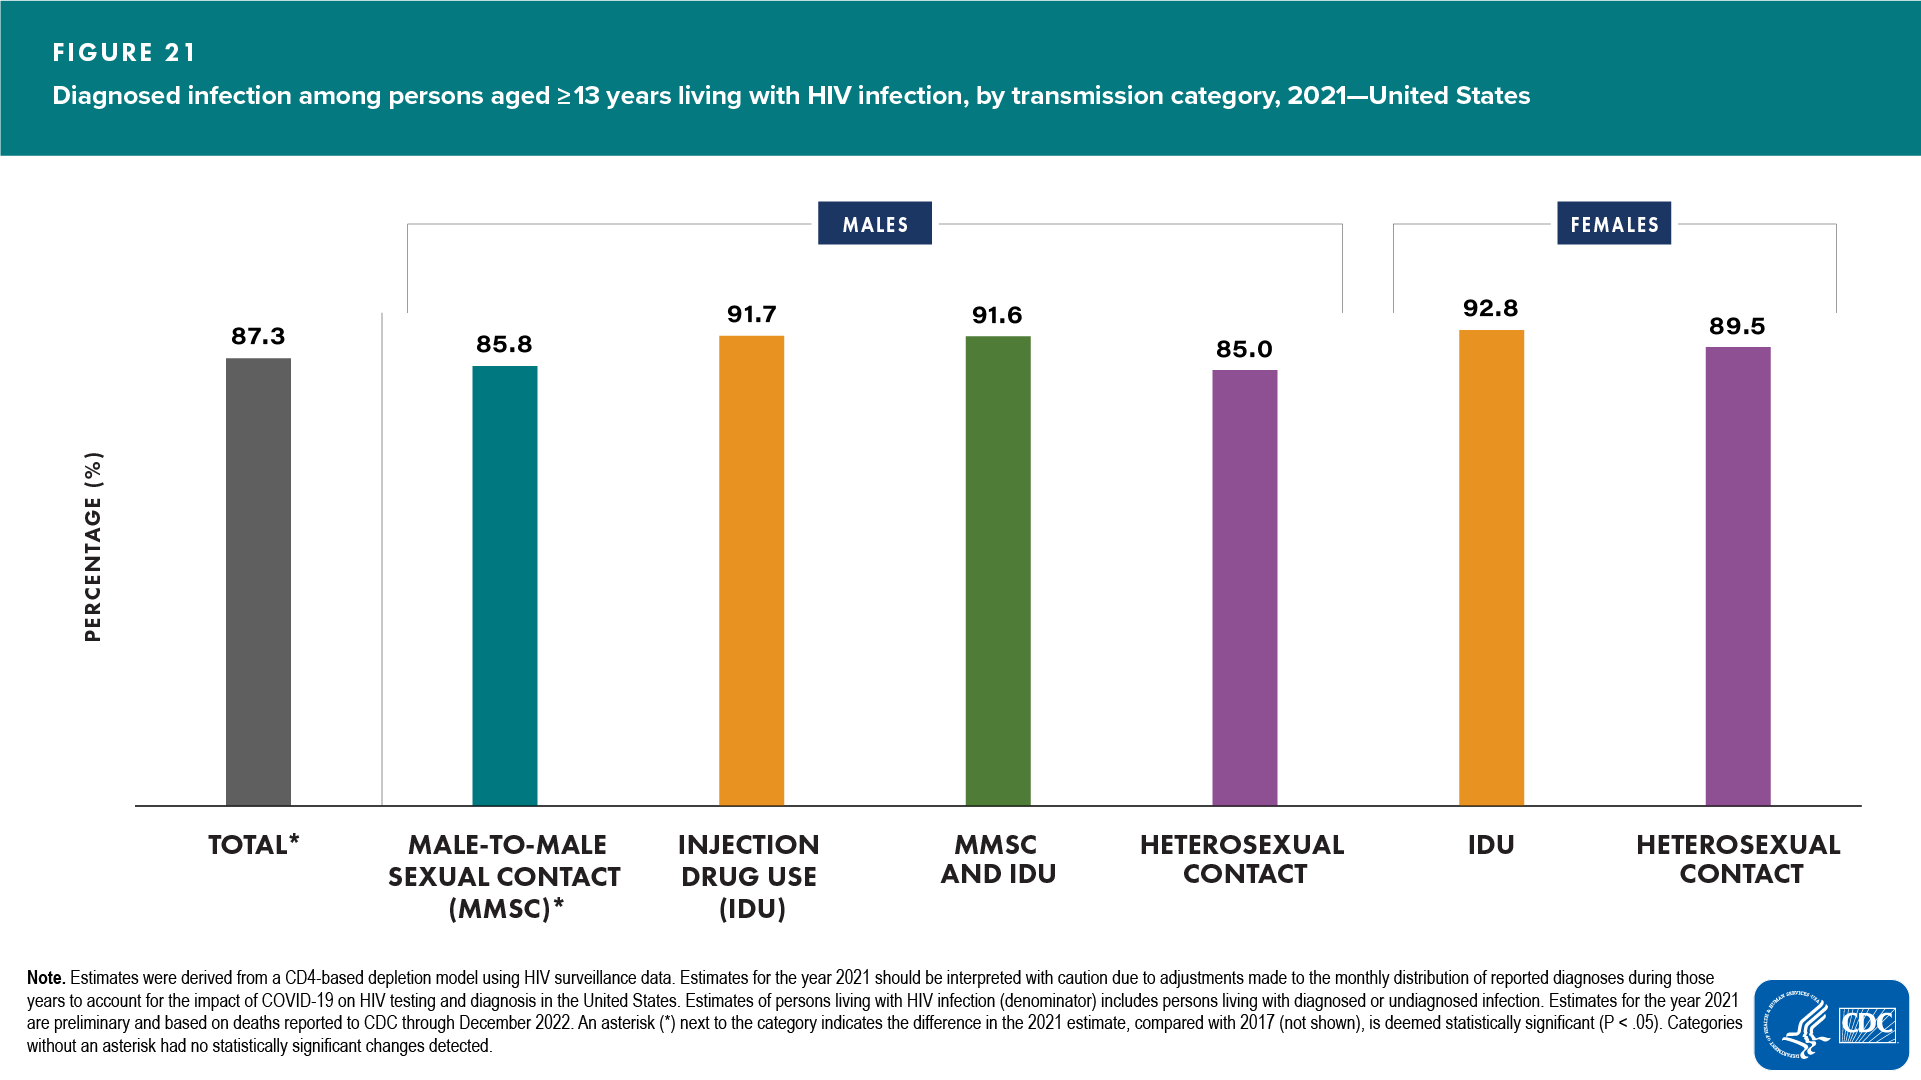 Figure 21. Diagnosed infection among persons aged ≥13 years living with diagnosed or undiagnosed HIV infection, by transmission category, 2021—United States